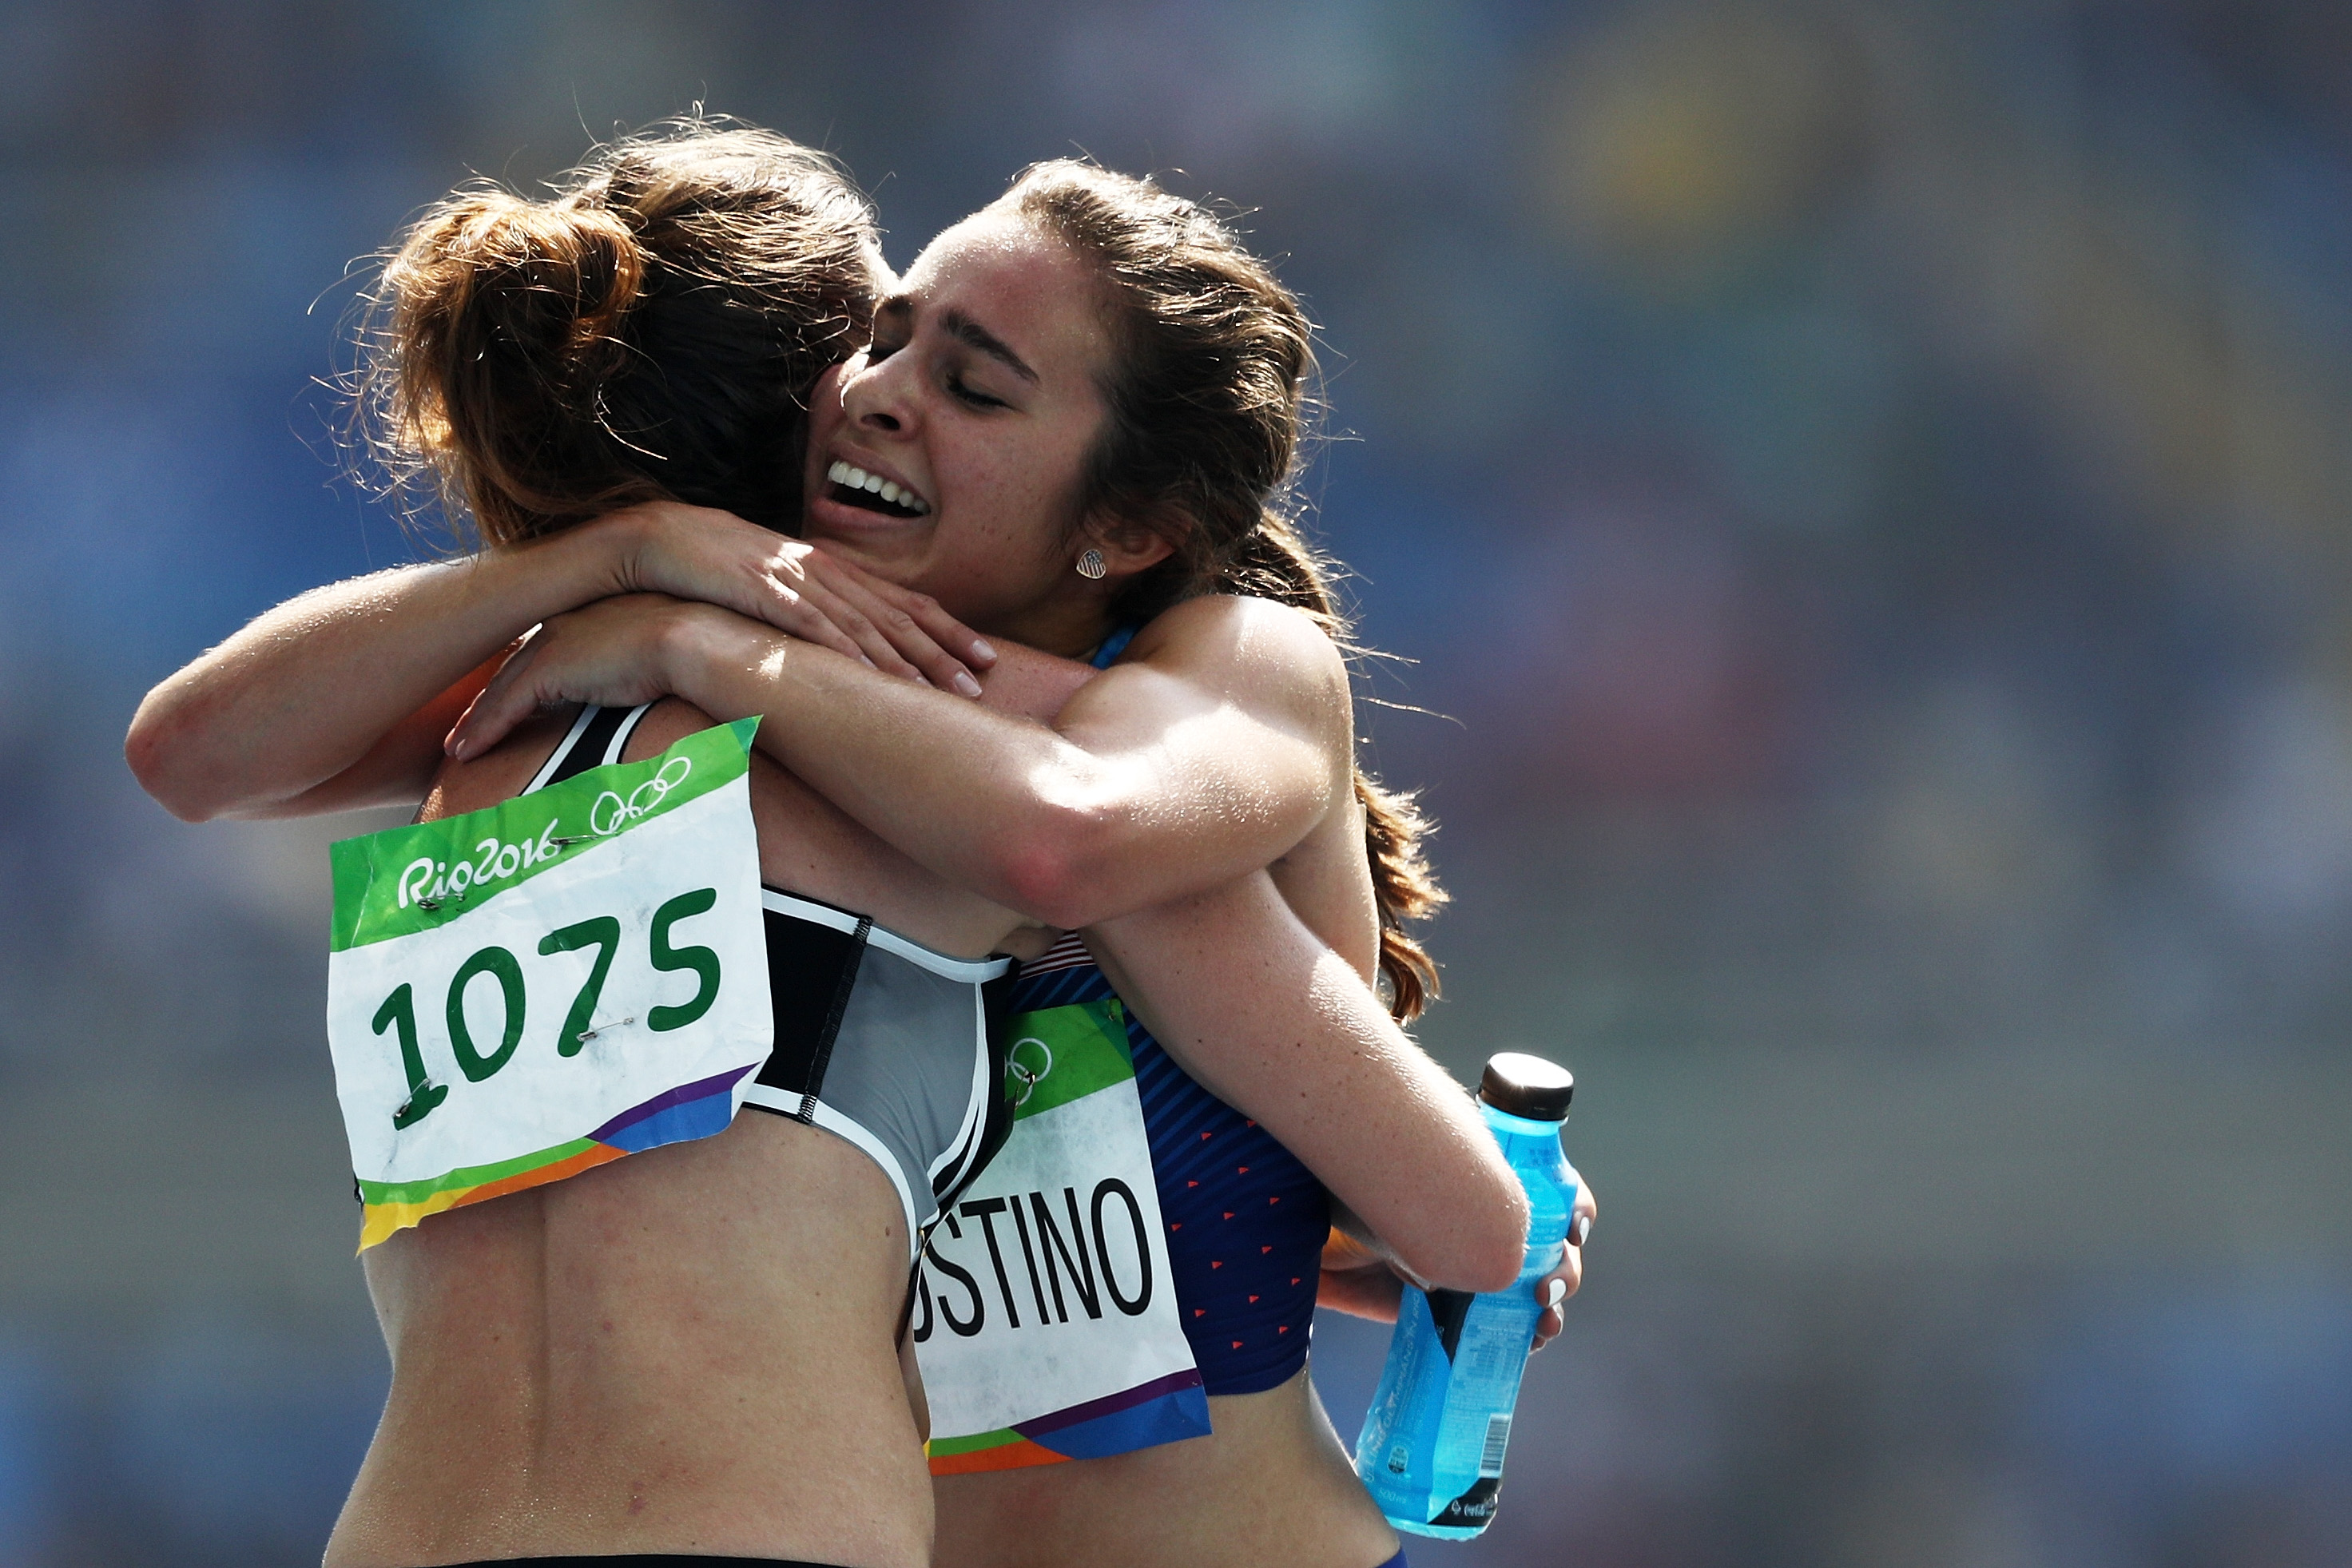 RIO DE JANEIRO, BRAZIL - AUGUST 16:  Abbey D'Agostino of the United States (R) hugs Nikki Hamblin of New Zealand after the Women's 5000m Round 1 - Heat 2 on Day 11 of the Rio 2016 Olympic Games at the Olympic Stadium on August 16, 2016 in Rio de Janeiro, Brazil.  (Photo by Patrick Smith/Getty Images)